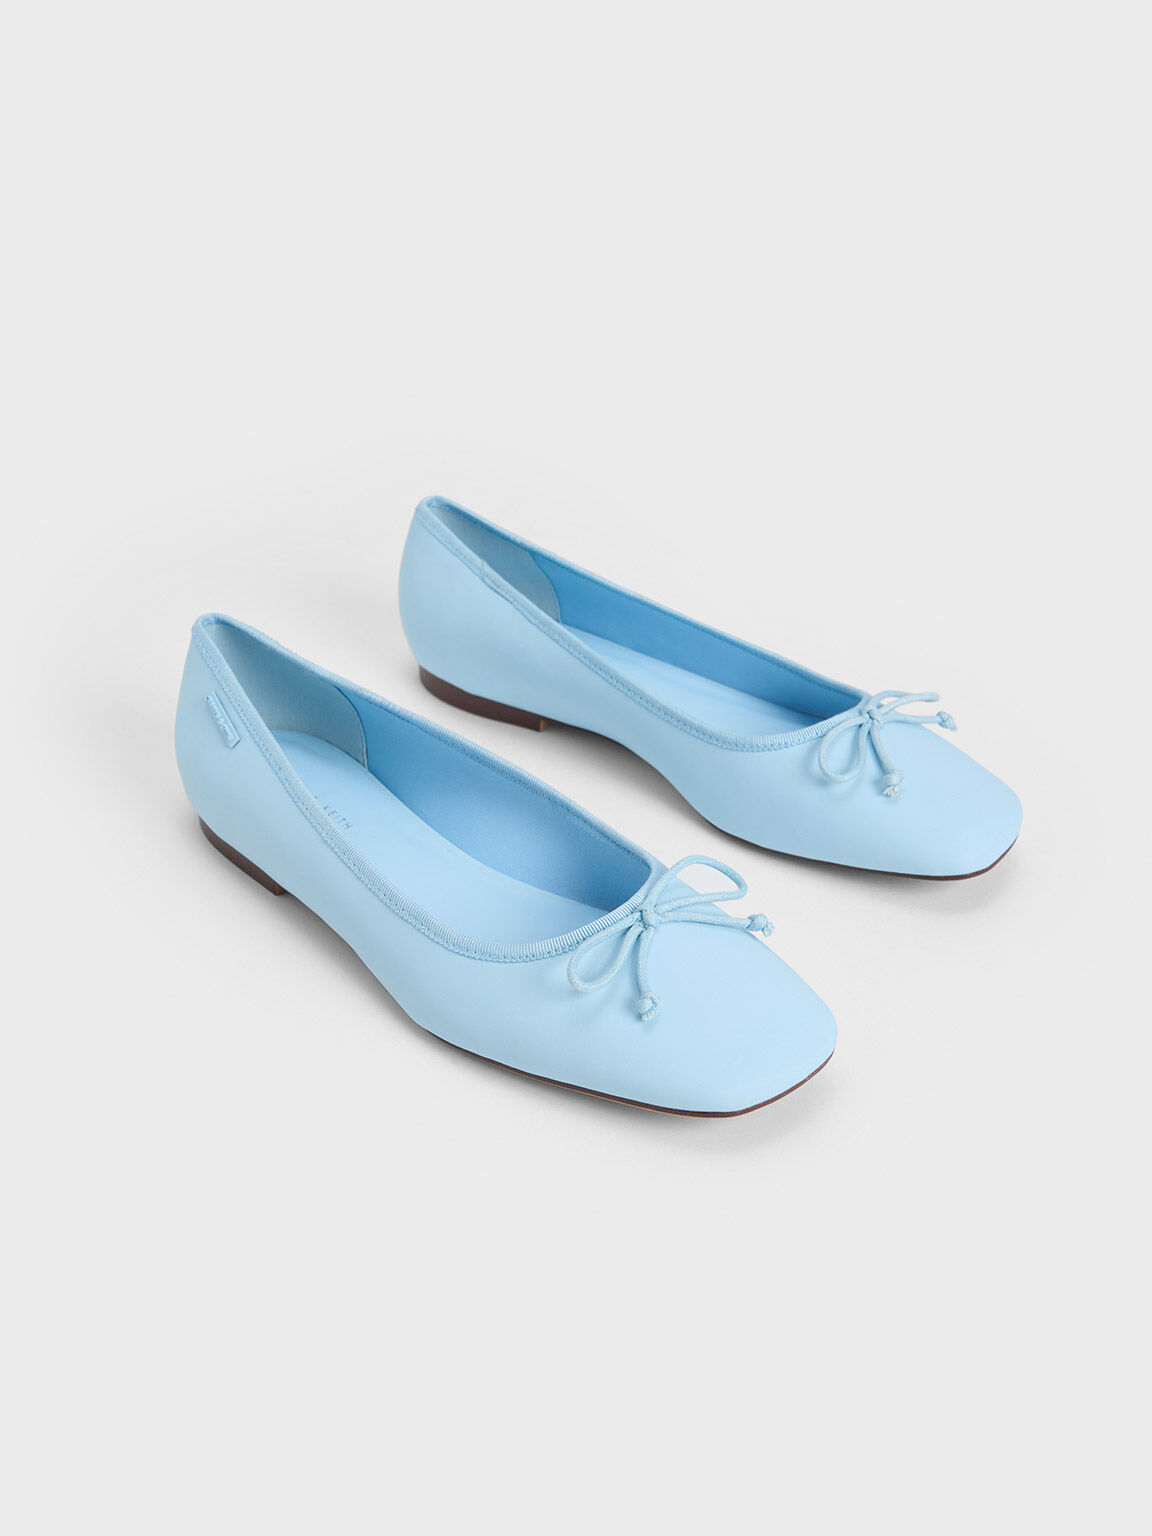 Rounded Square-Toe Bow Ballerinas, Light Blue, hi-res